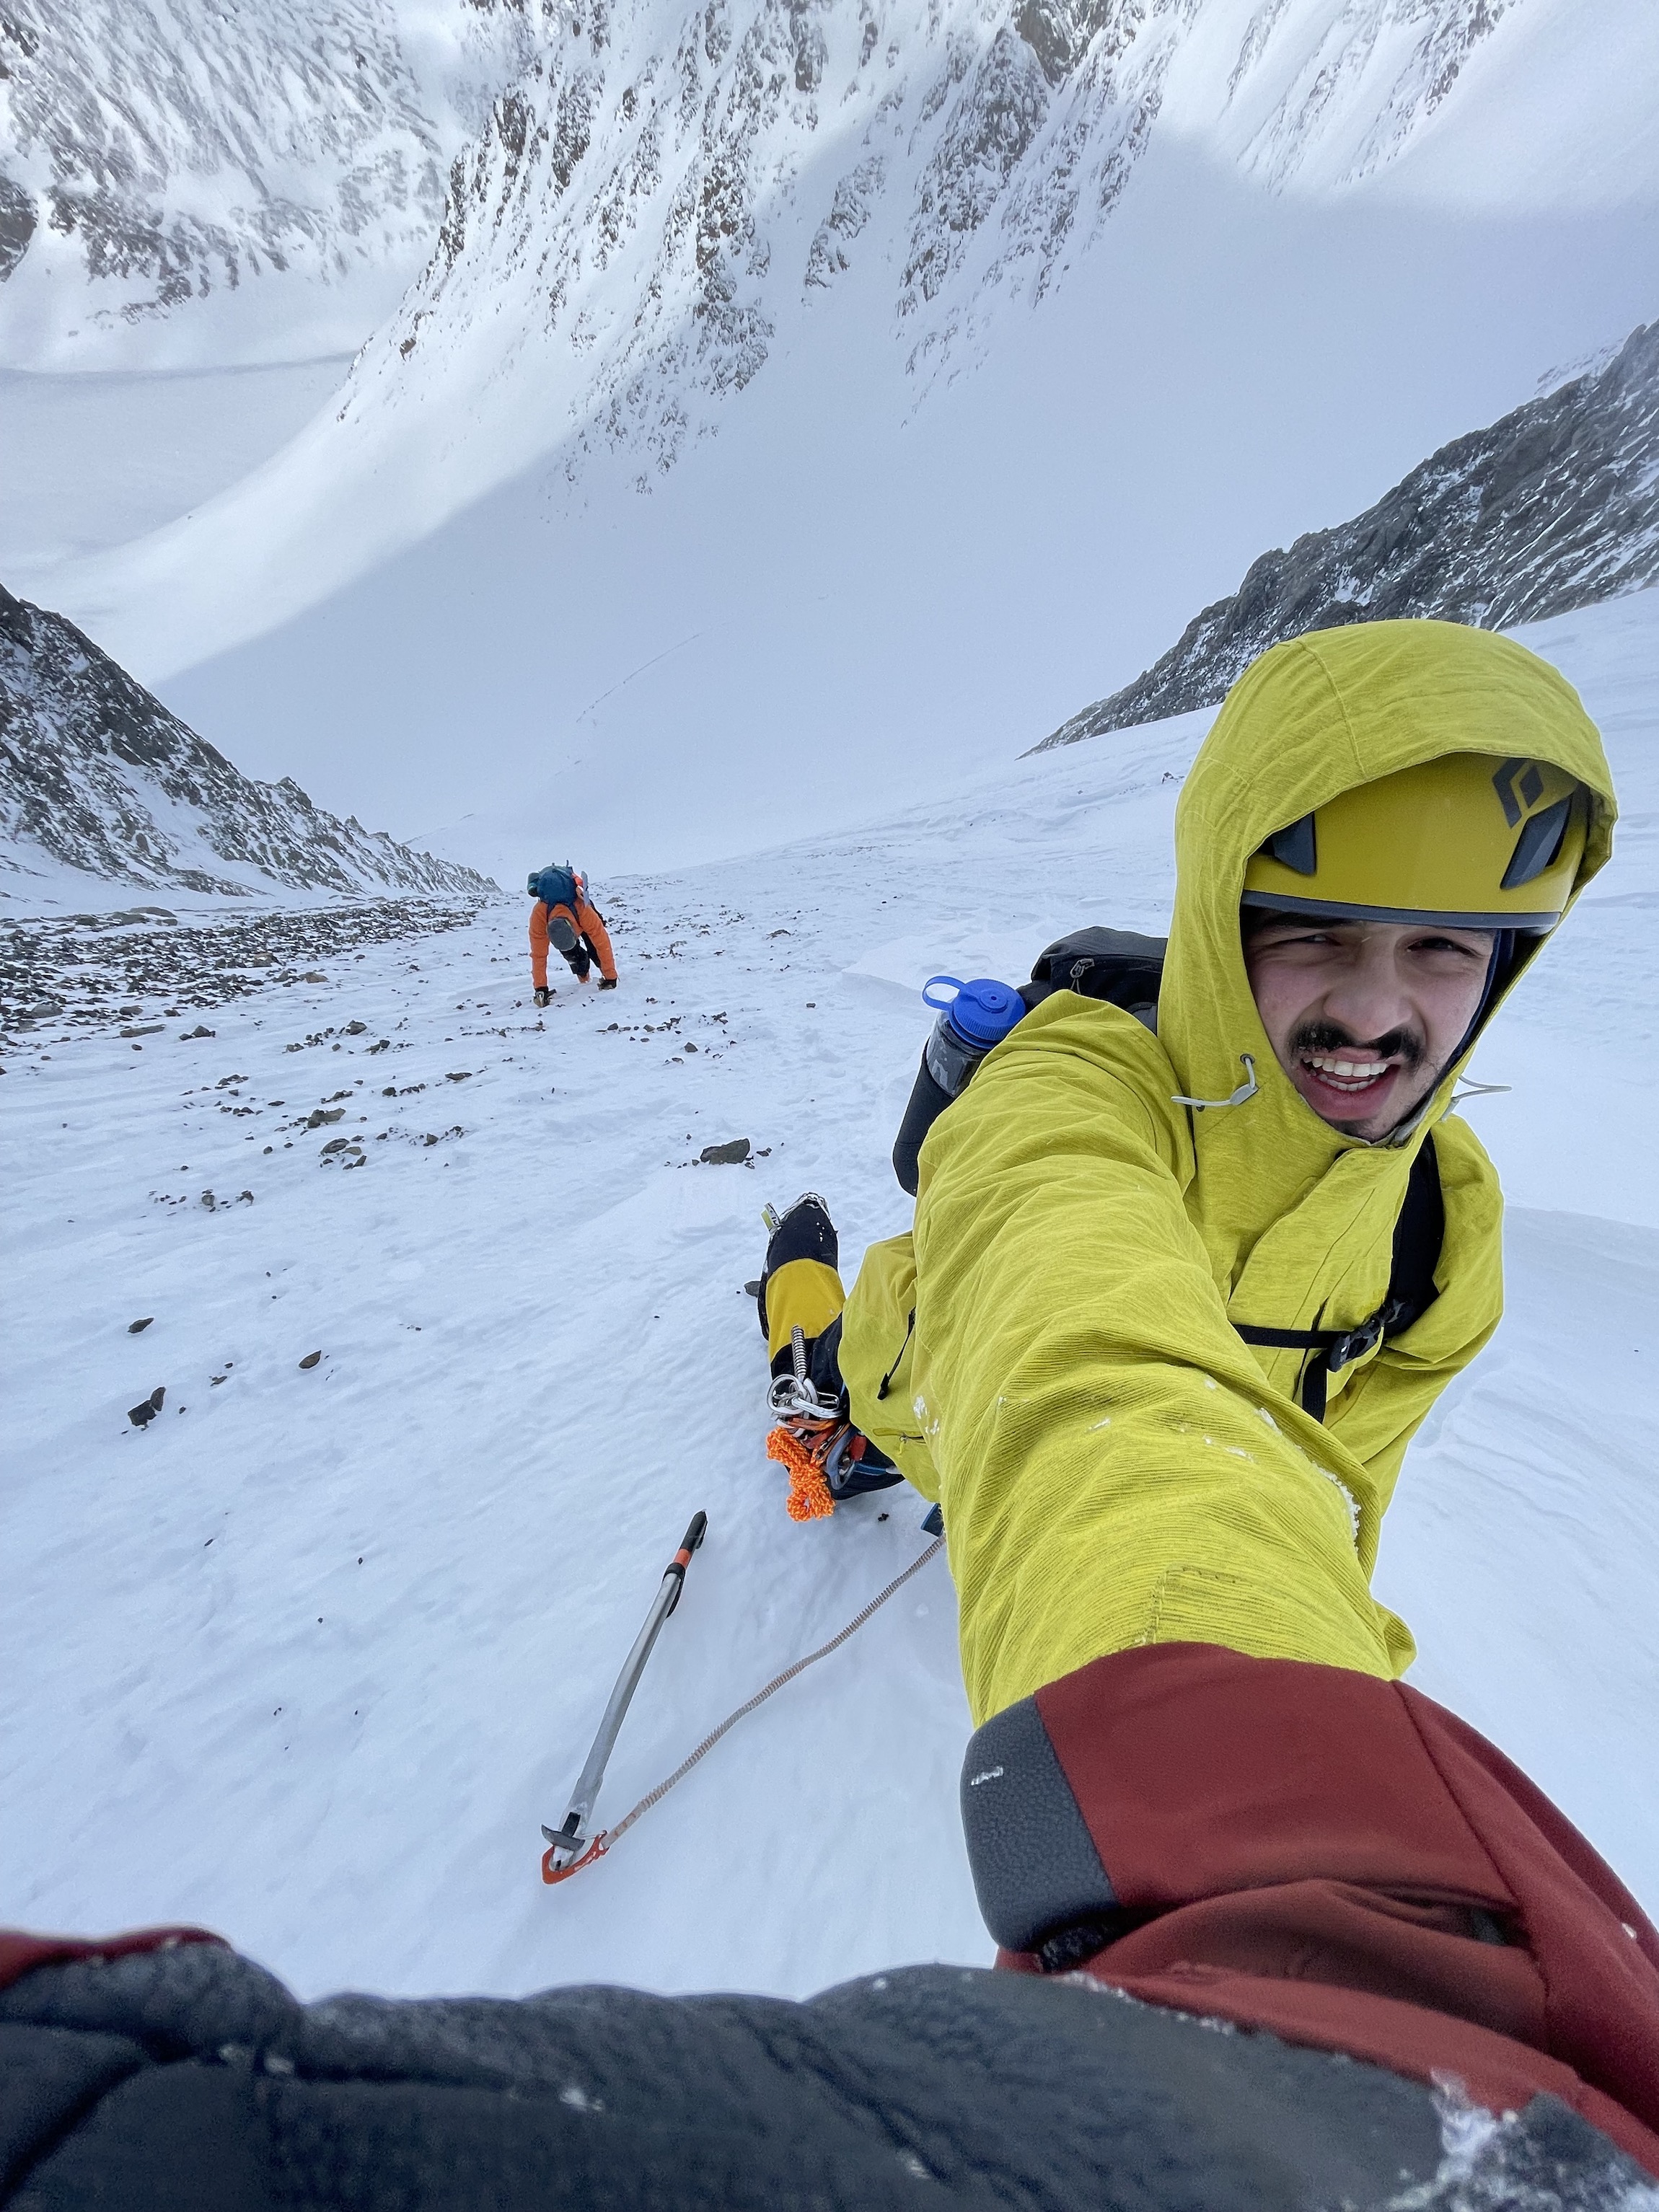 Close-up shot of a mountain climber in a yellow jacket jacket and helmet reaching up towards the camera with another climber lower down the slope